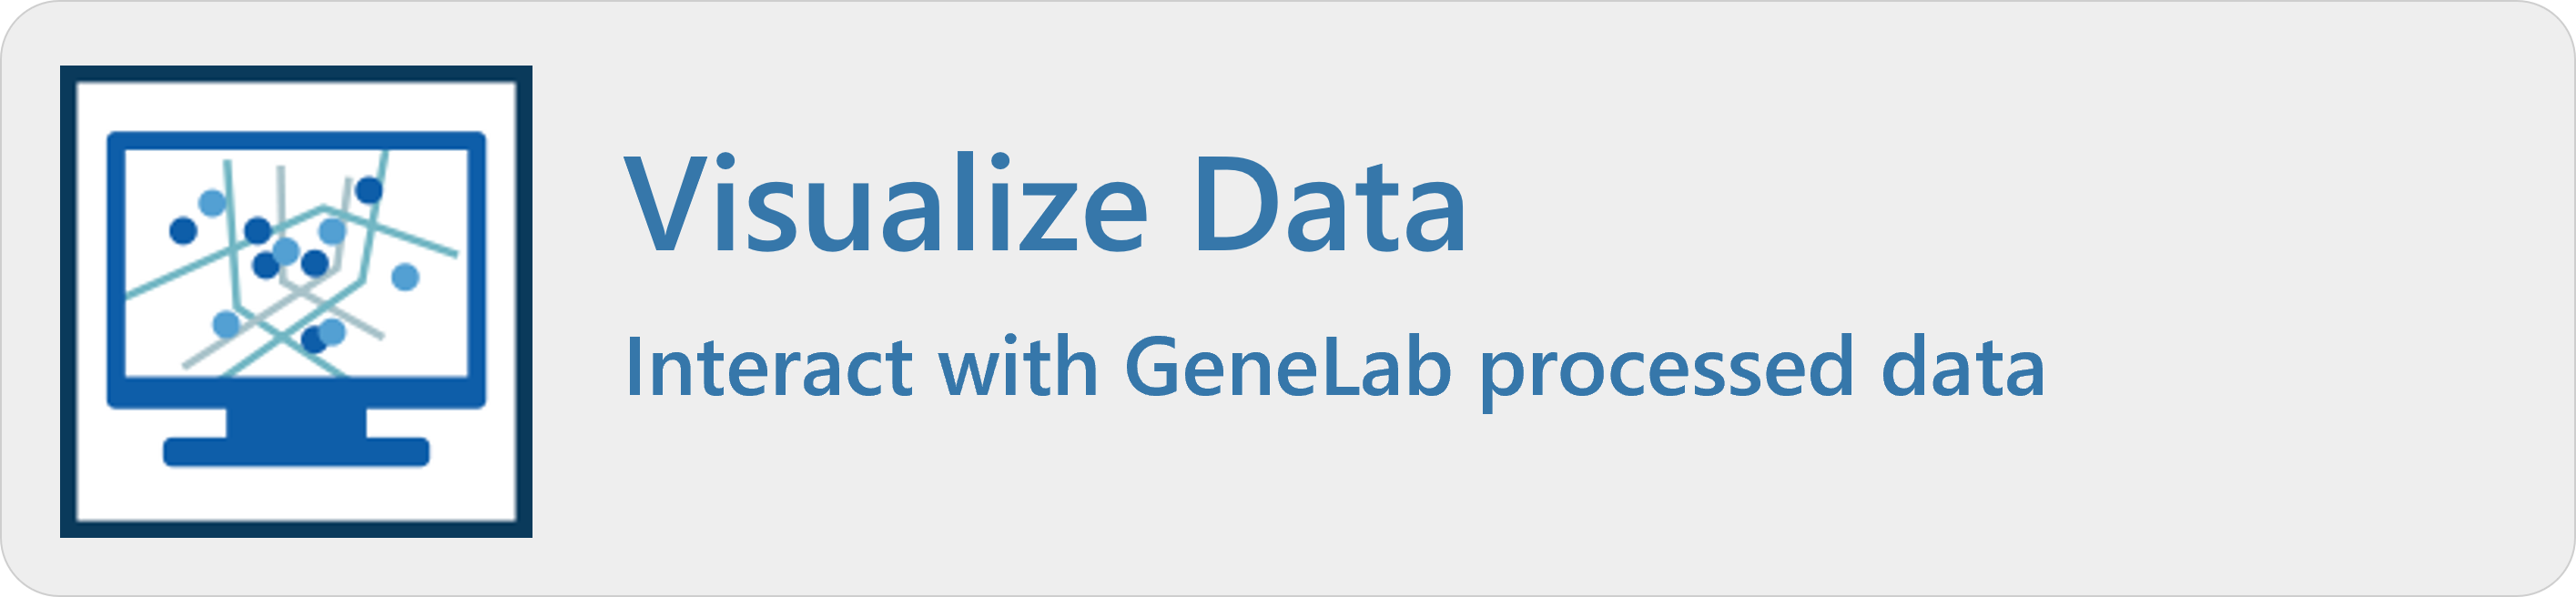 Visualize Data - Interact with GeneLab processed data